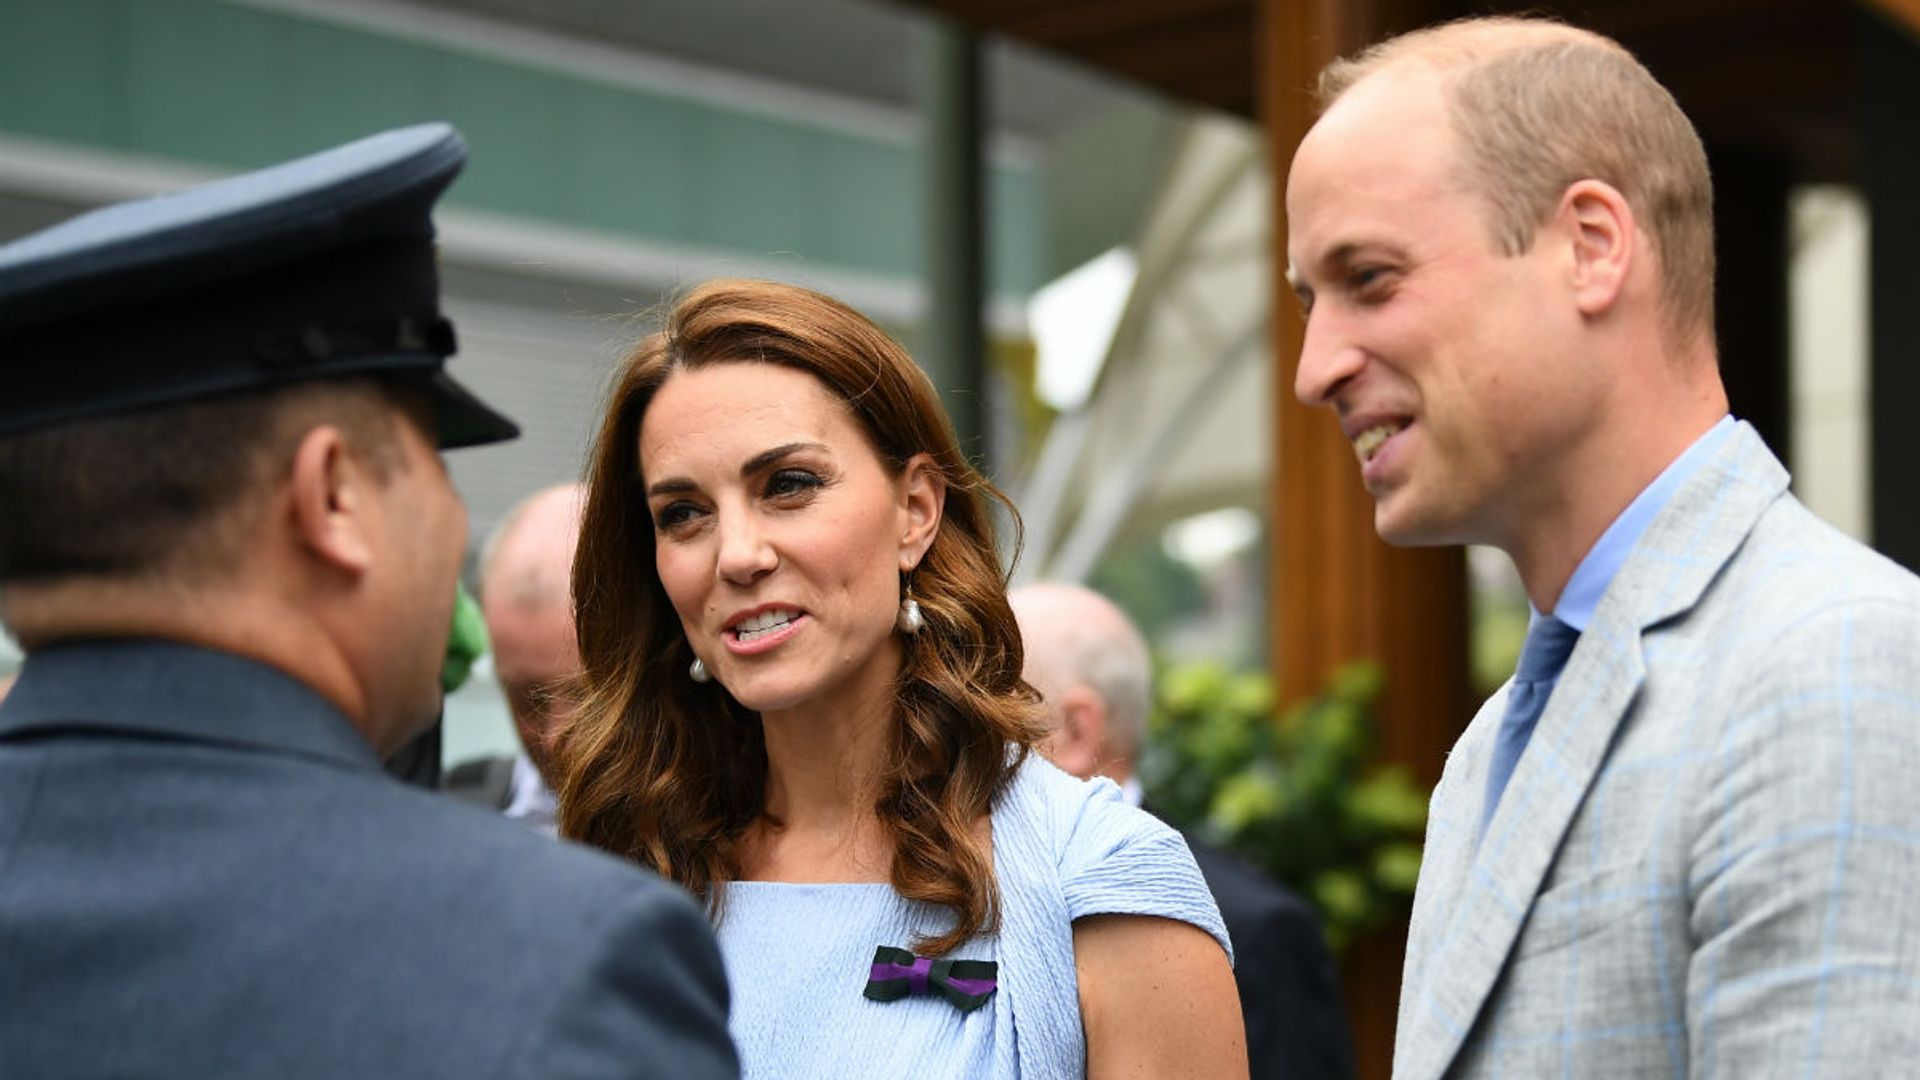 The Duchess of Cambridge is radiant in blue at the men's Wimbledon finals with Prince William